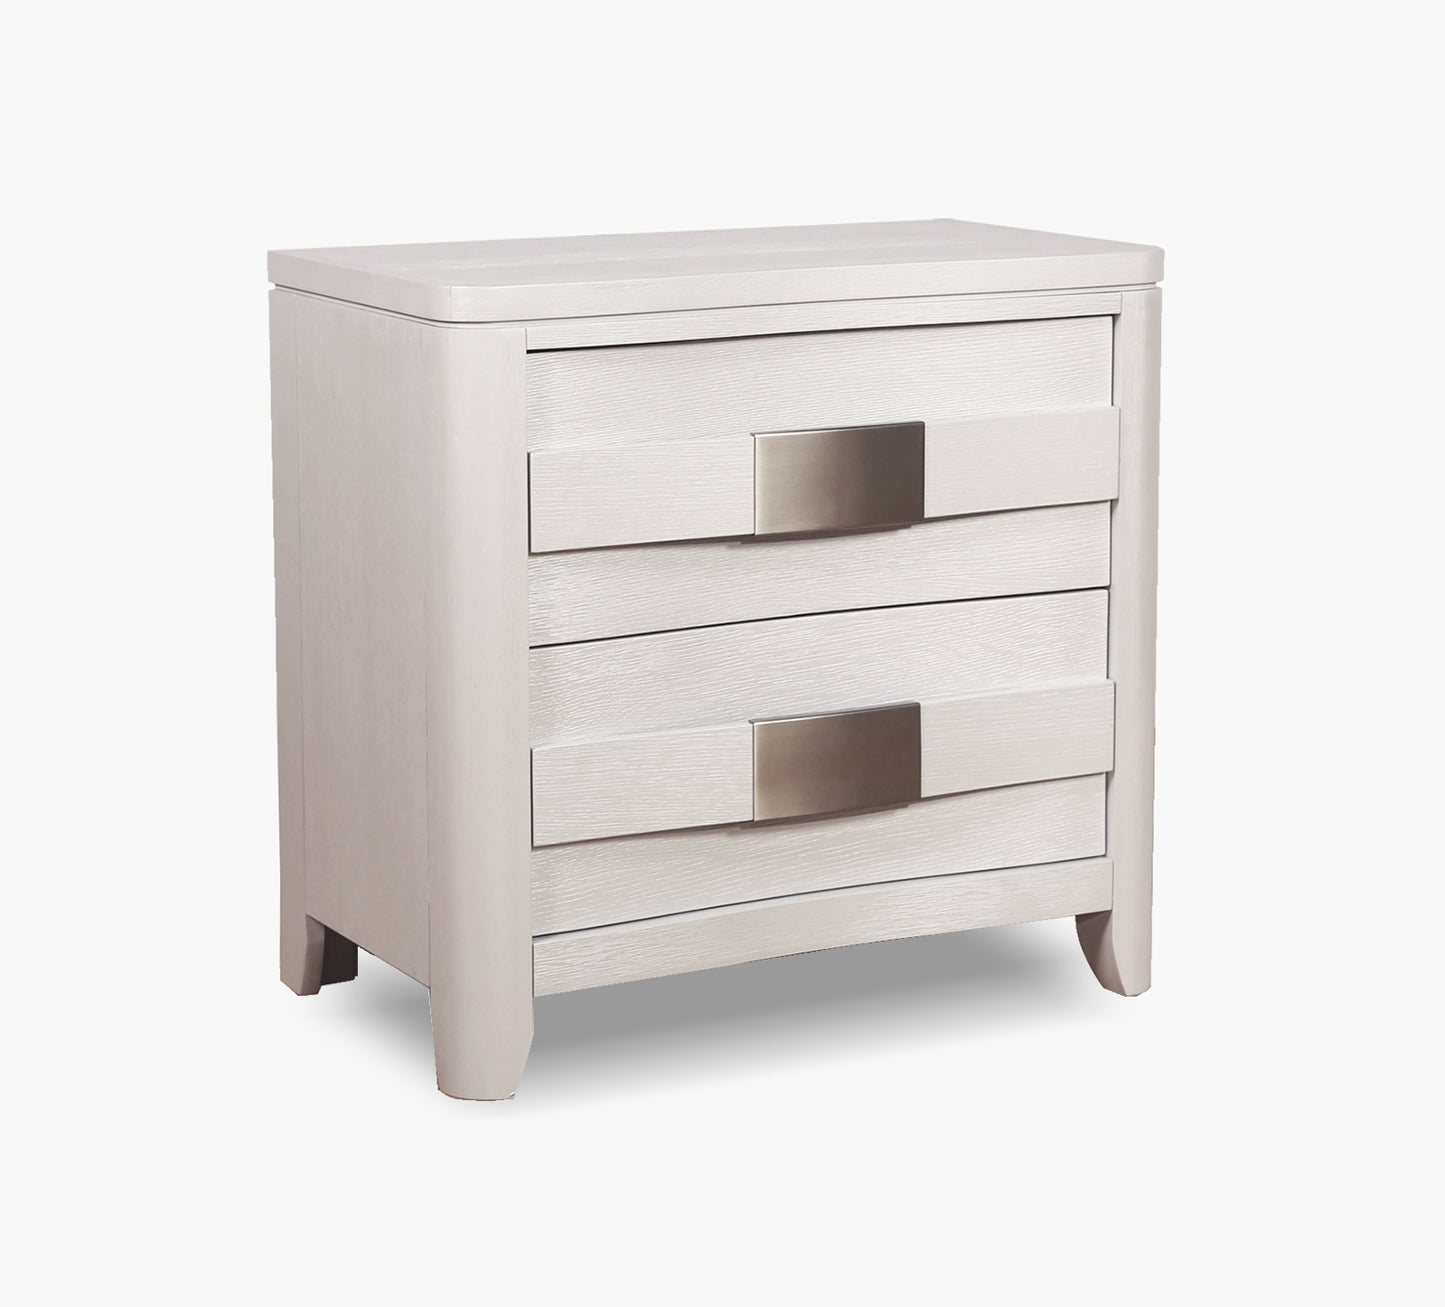 Contour Pearlized White 2 Drawer Nightstand